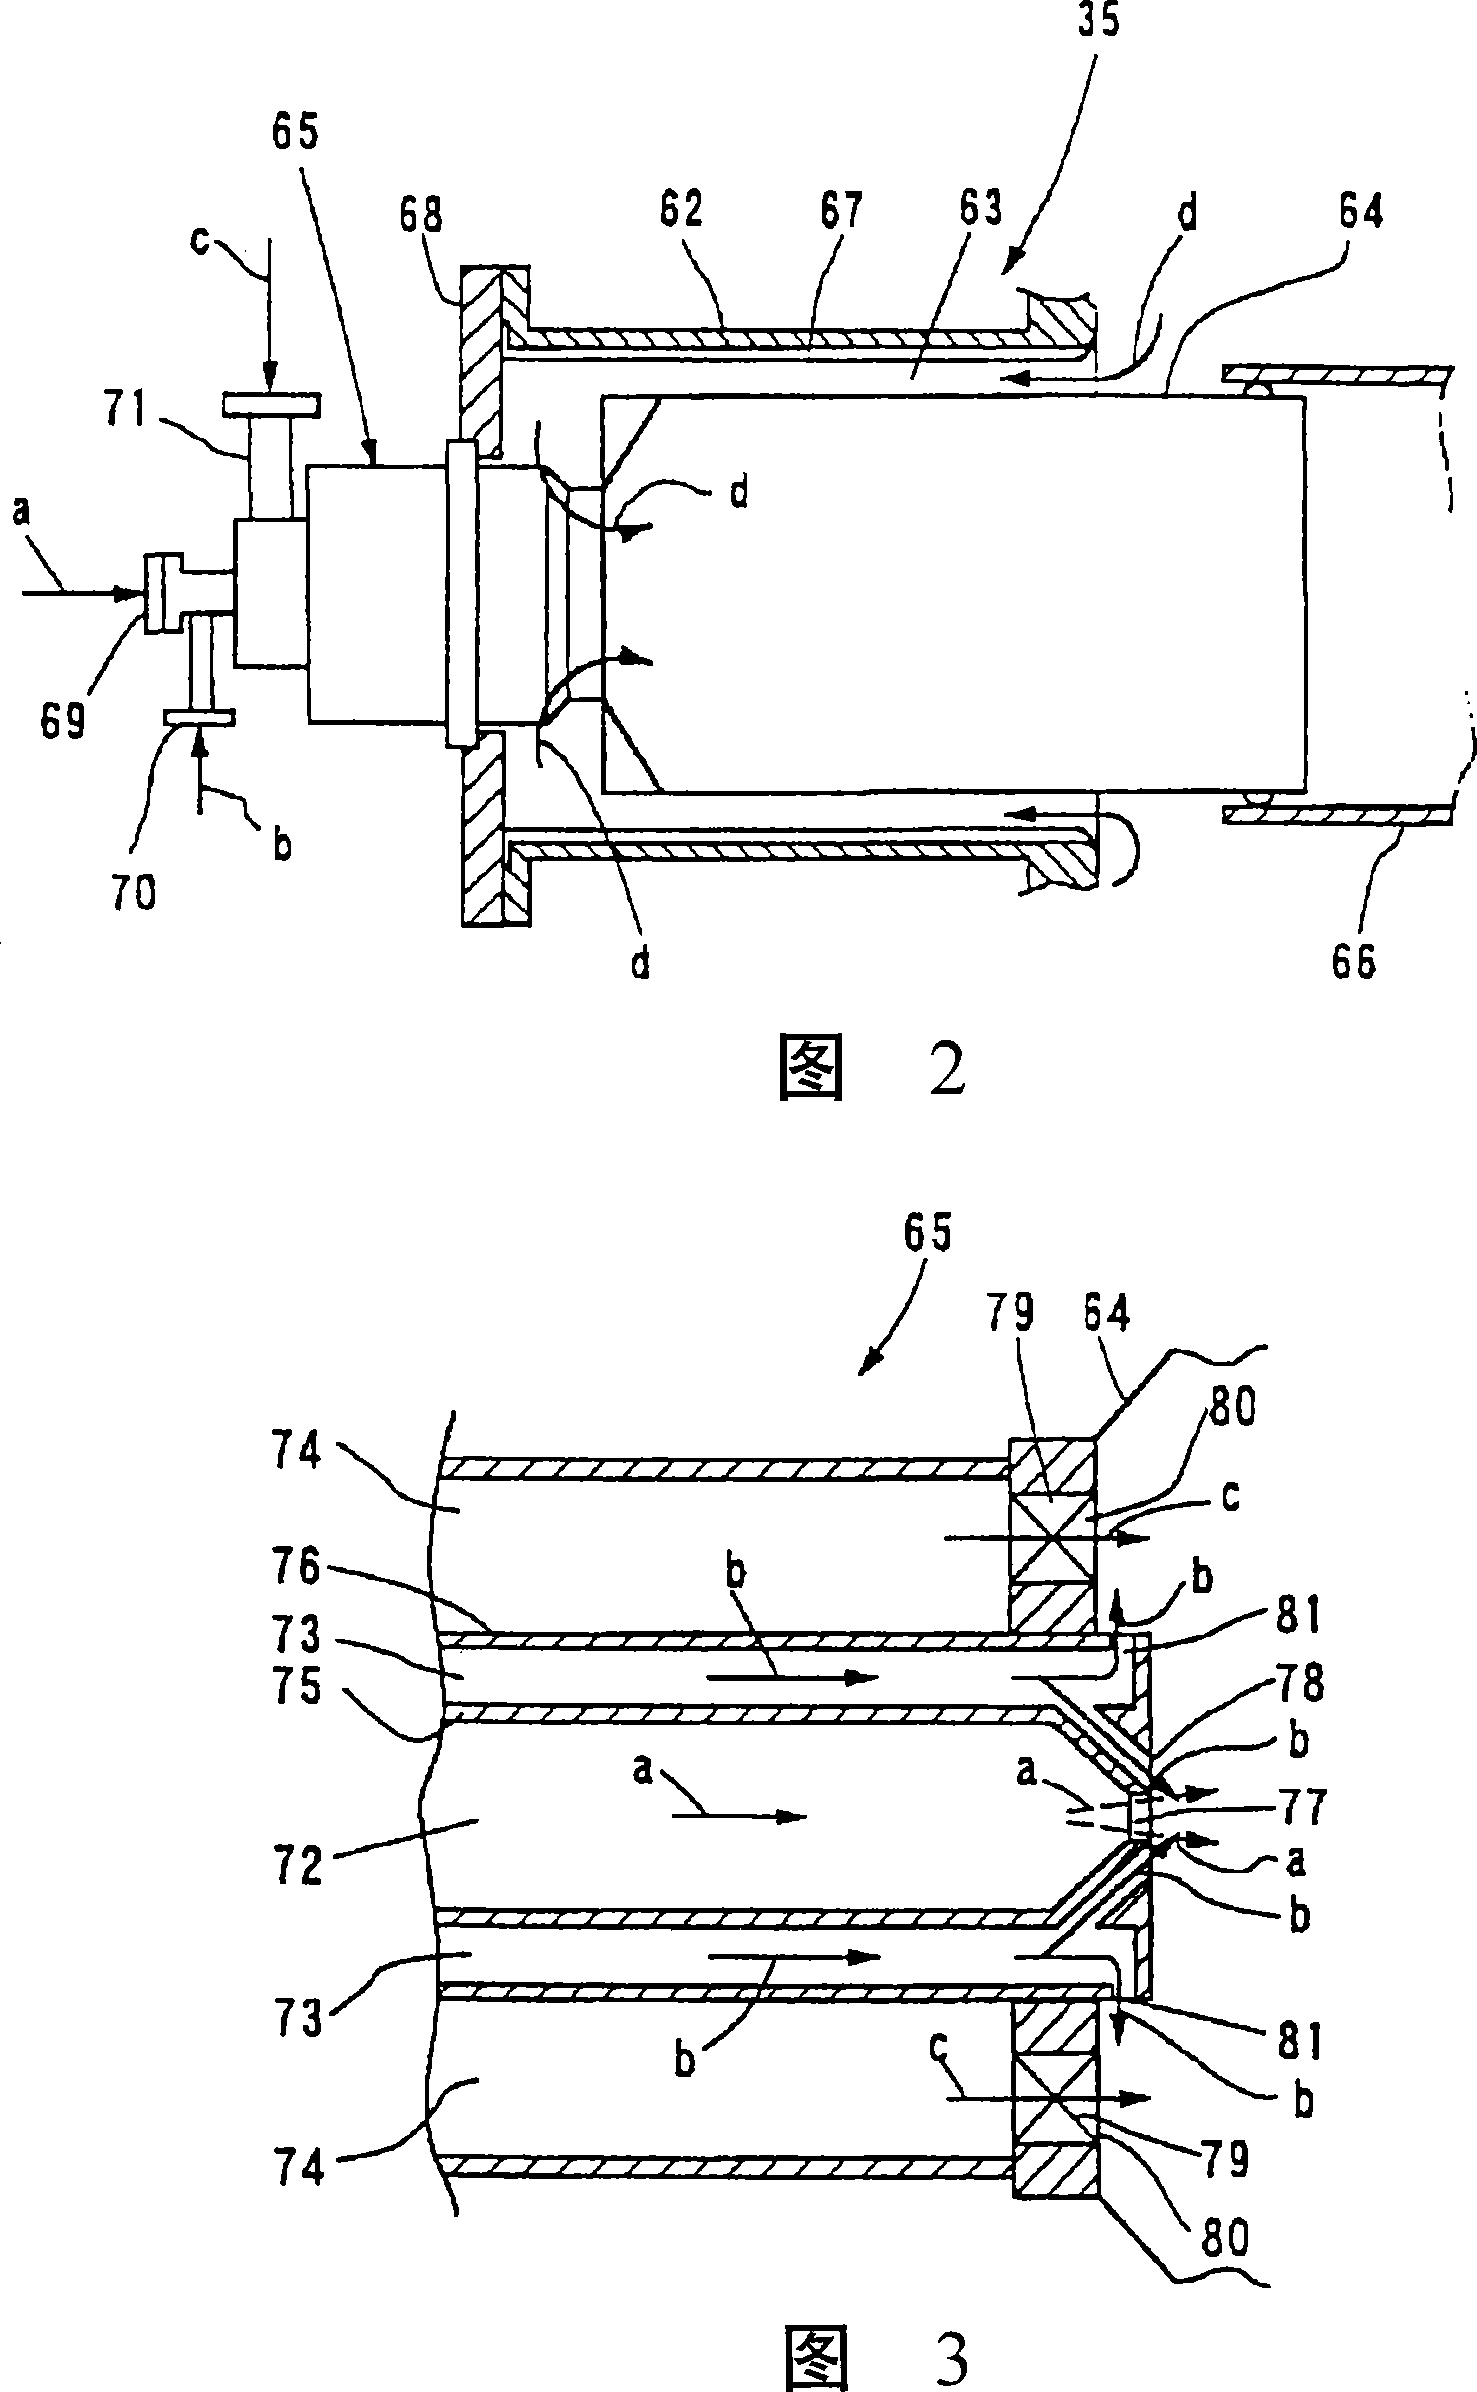 Operating method for coal gasification combined cycle power plant